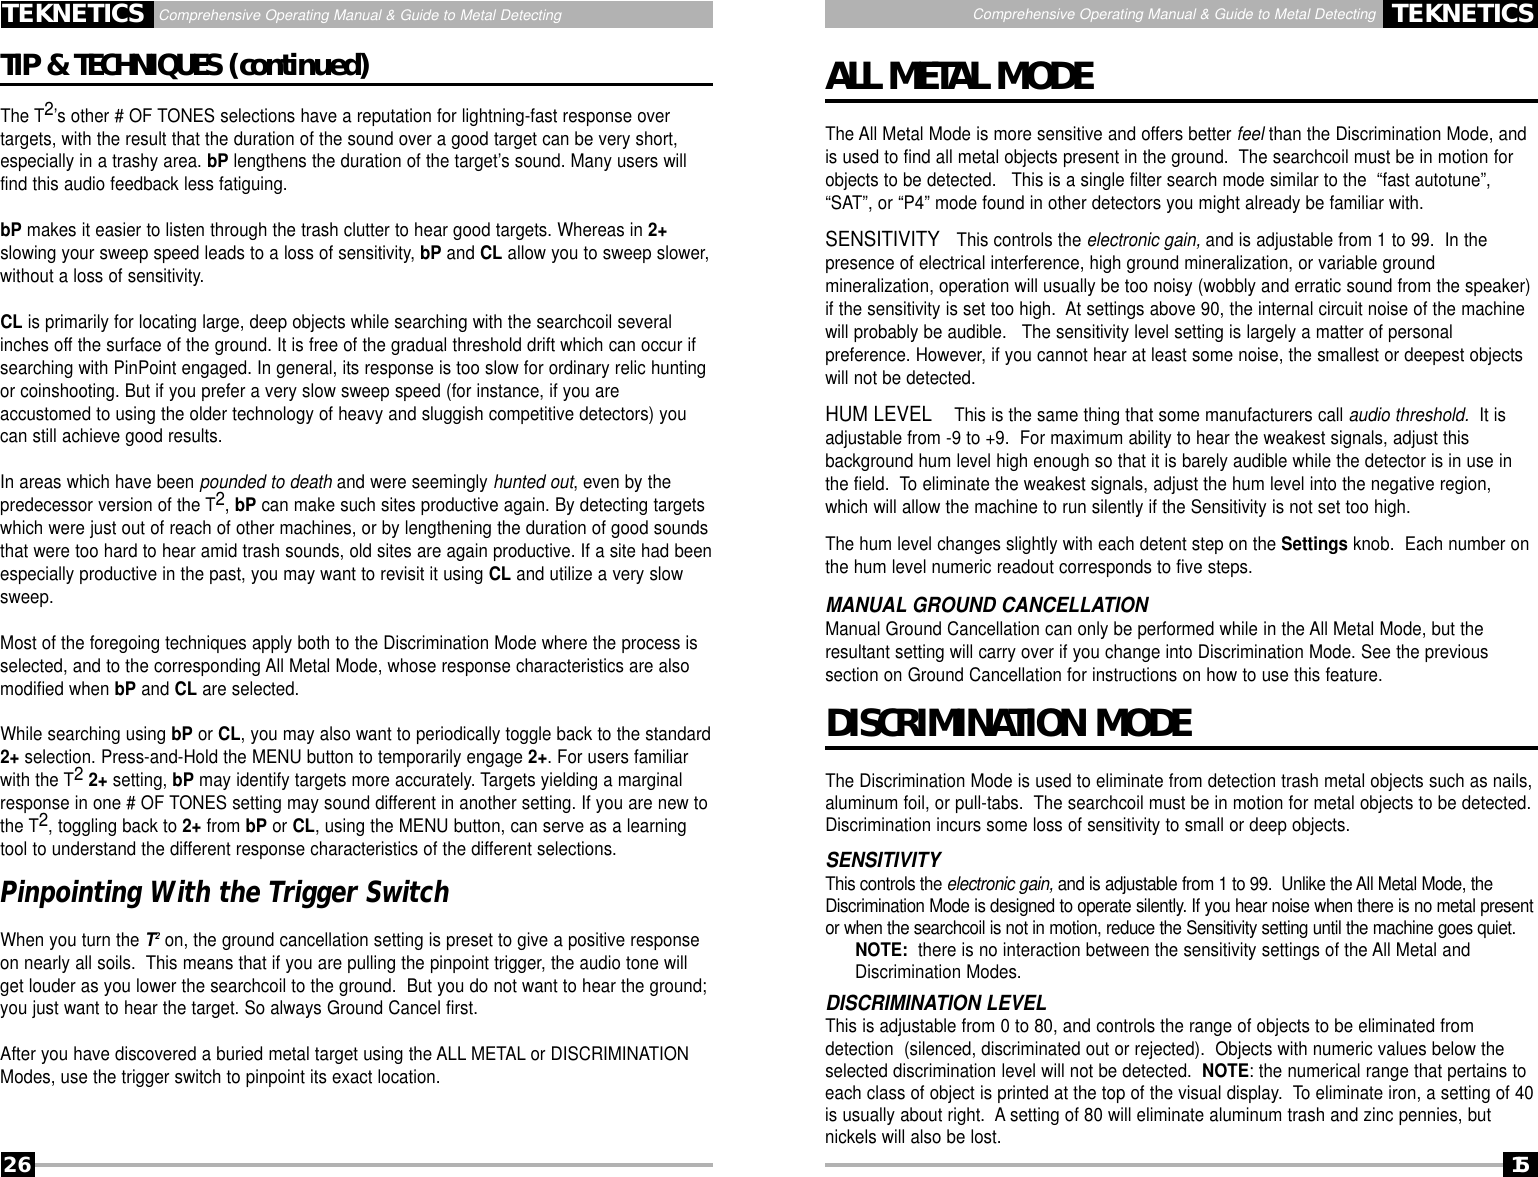 Page 15 of First Texas T2MD Professional Metal Detector User Manual Layout 1